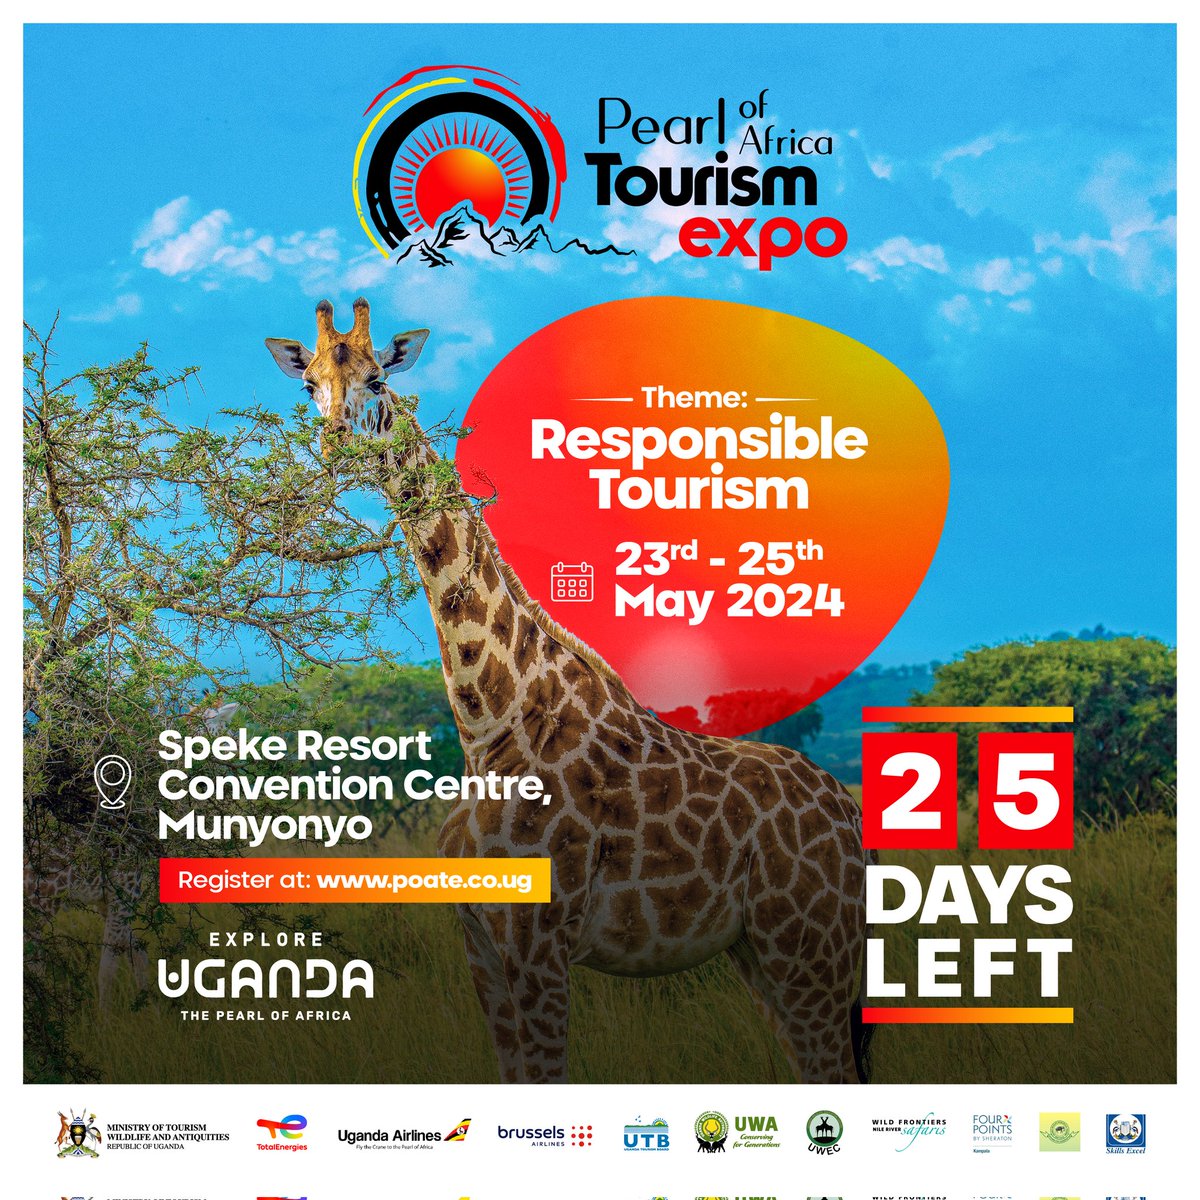 Only 25 days left to #POATE2024 Book your slot and be a part of the biggest event in the region that provides a platform for you to showcase your business to the world, network, and learn from industry experts. 💻 poate.co.ug 📍@spekeresort 🗓️ 23 - 25 May, 2024